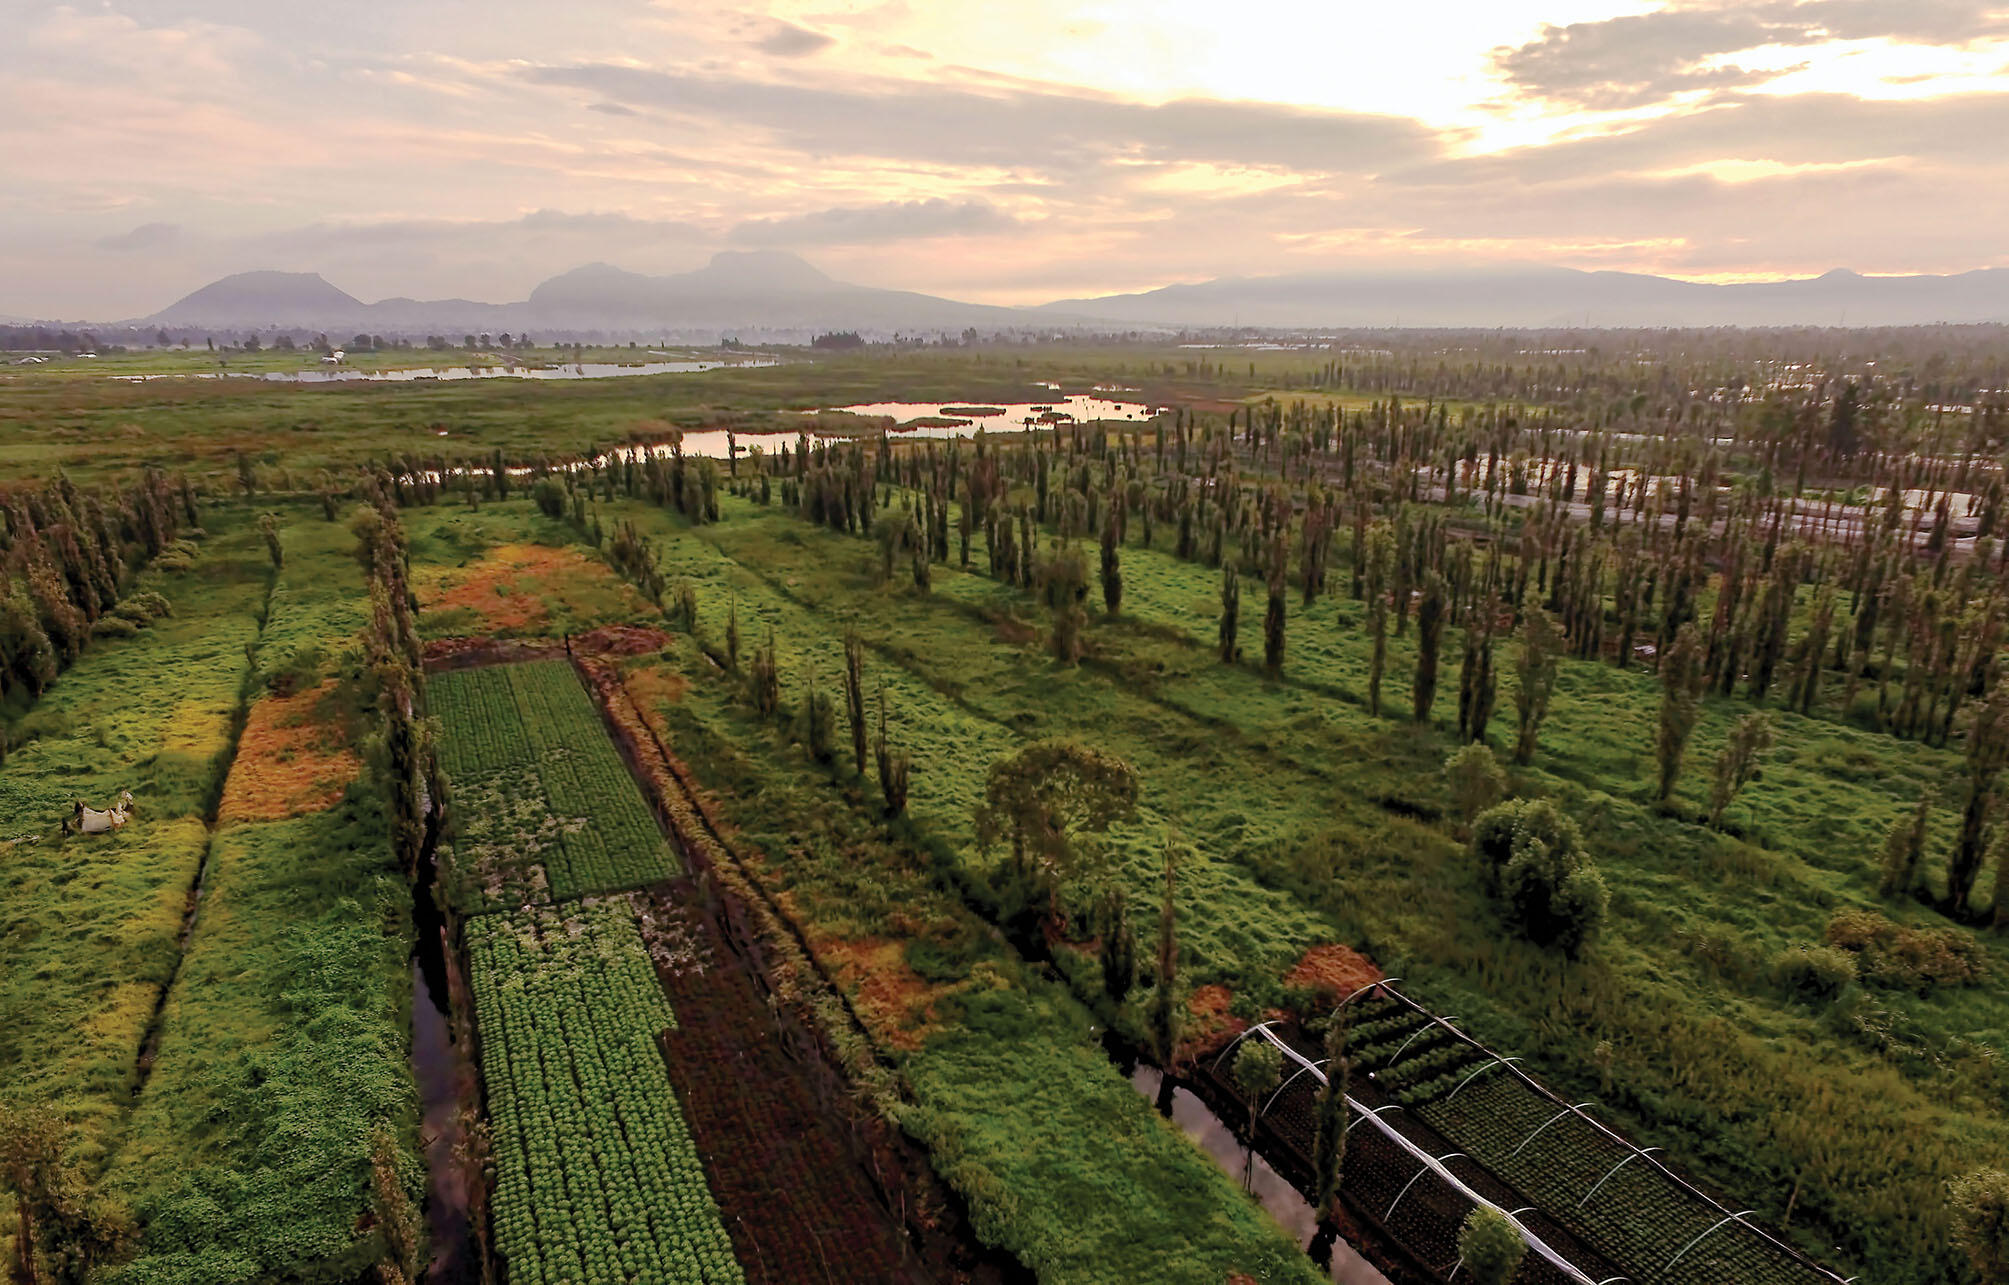 The urban sprawl of Mexico City replaced well-watered land that promotes agriculture in the chinampas of Xochimilco, whose fields are shown here in an aerial shot of green vegetation and canals, less than 15 miles away.  (Photo by Pablo Leautaud.)